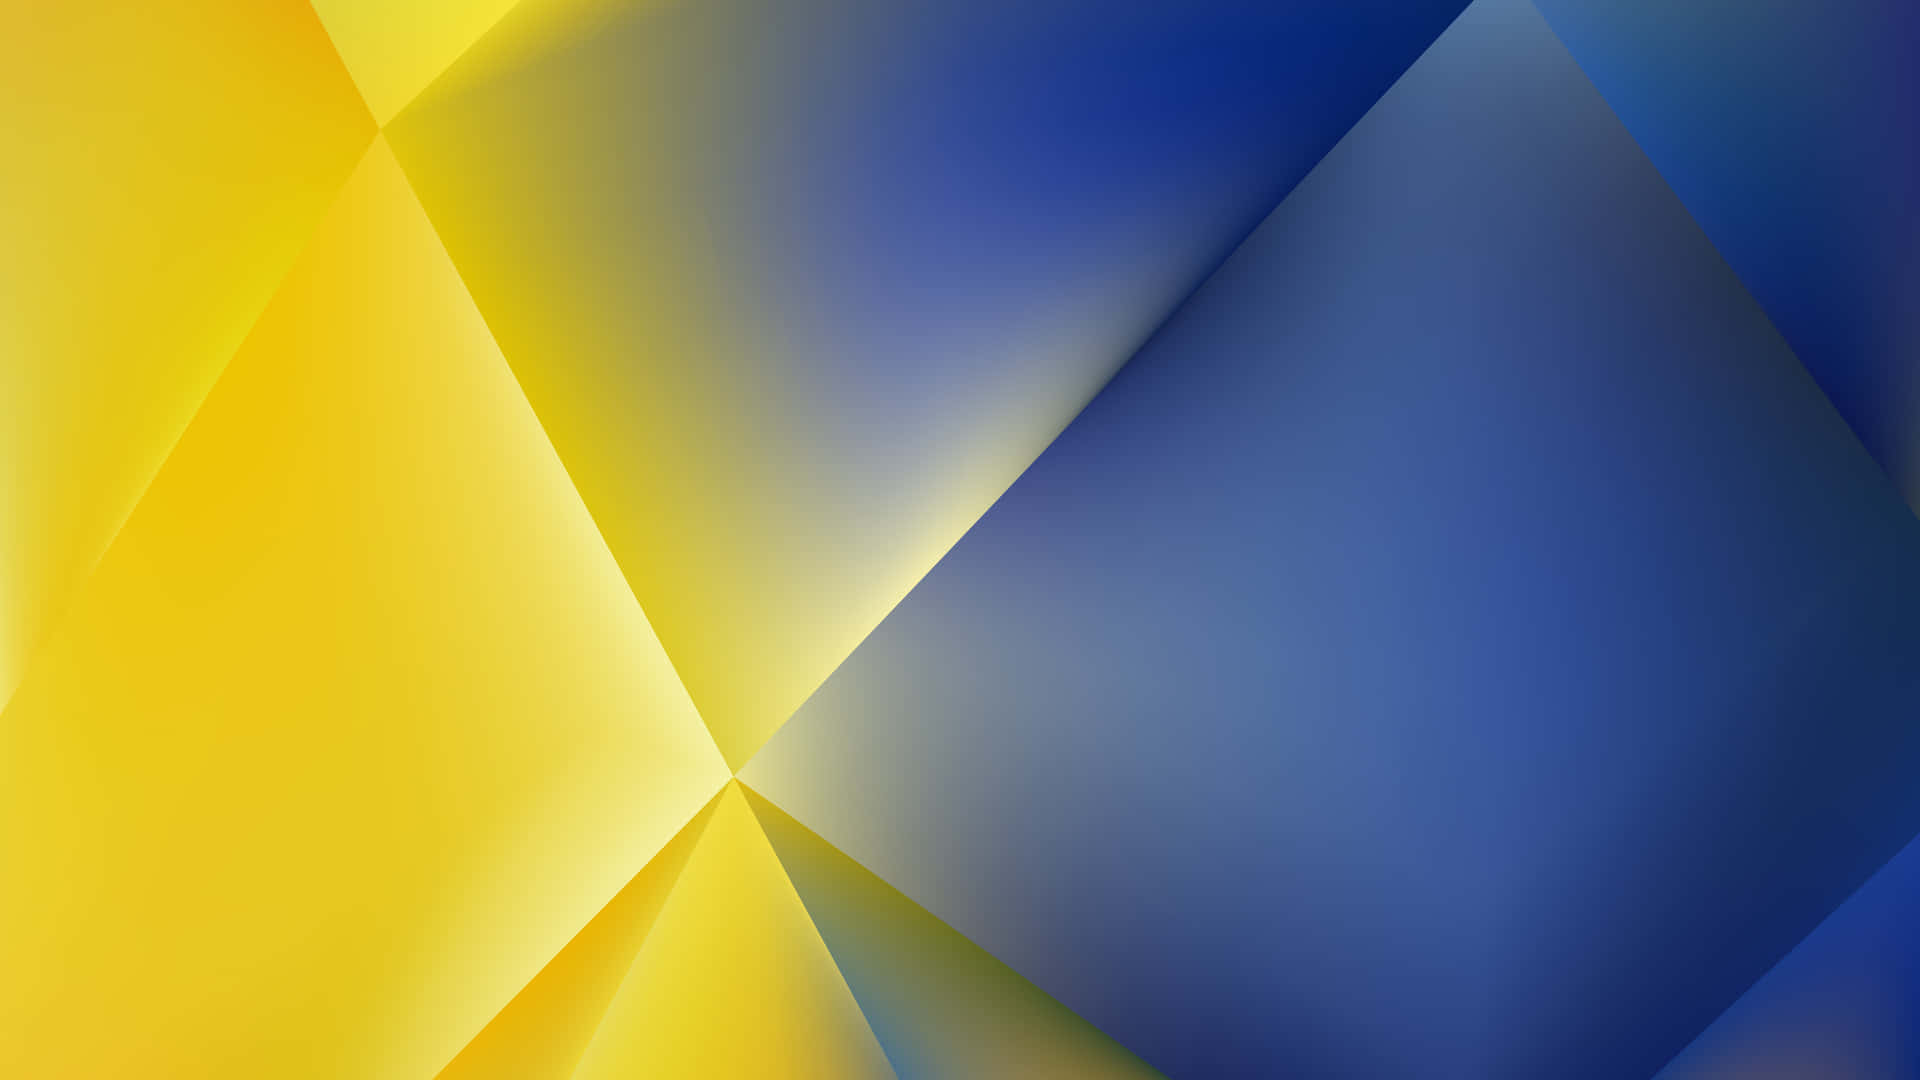 Bright and Vibrant Yellow&Blue Contrasting Background